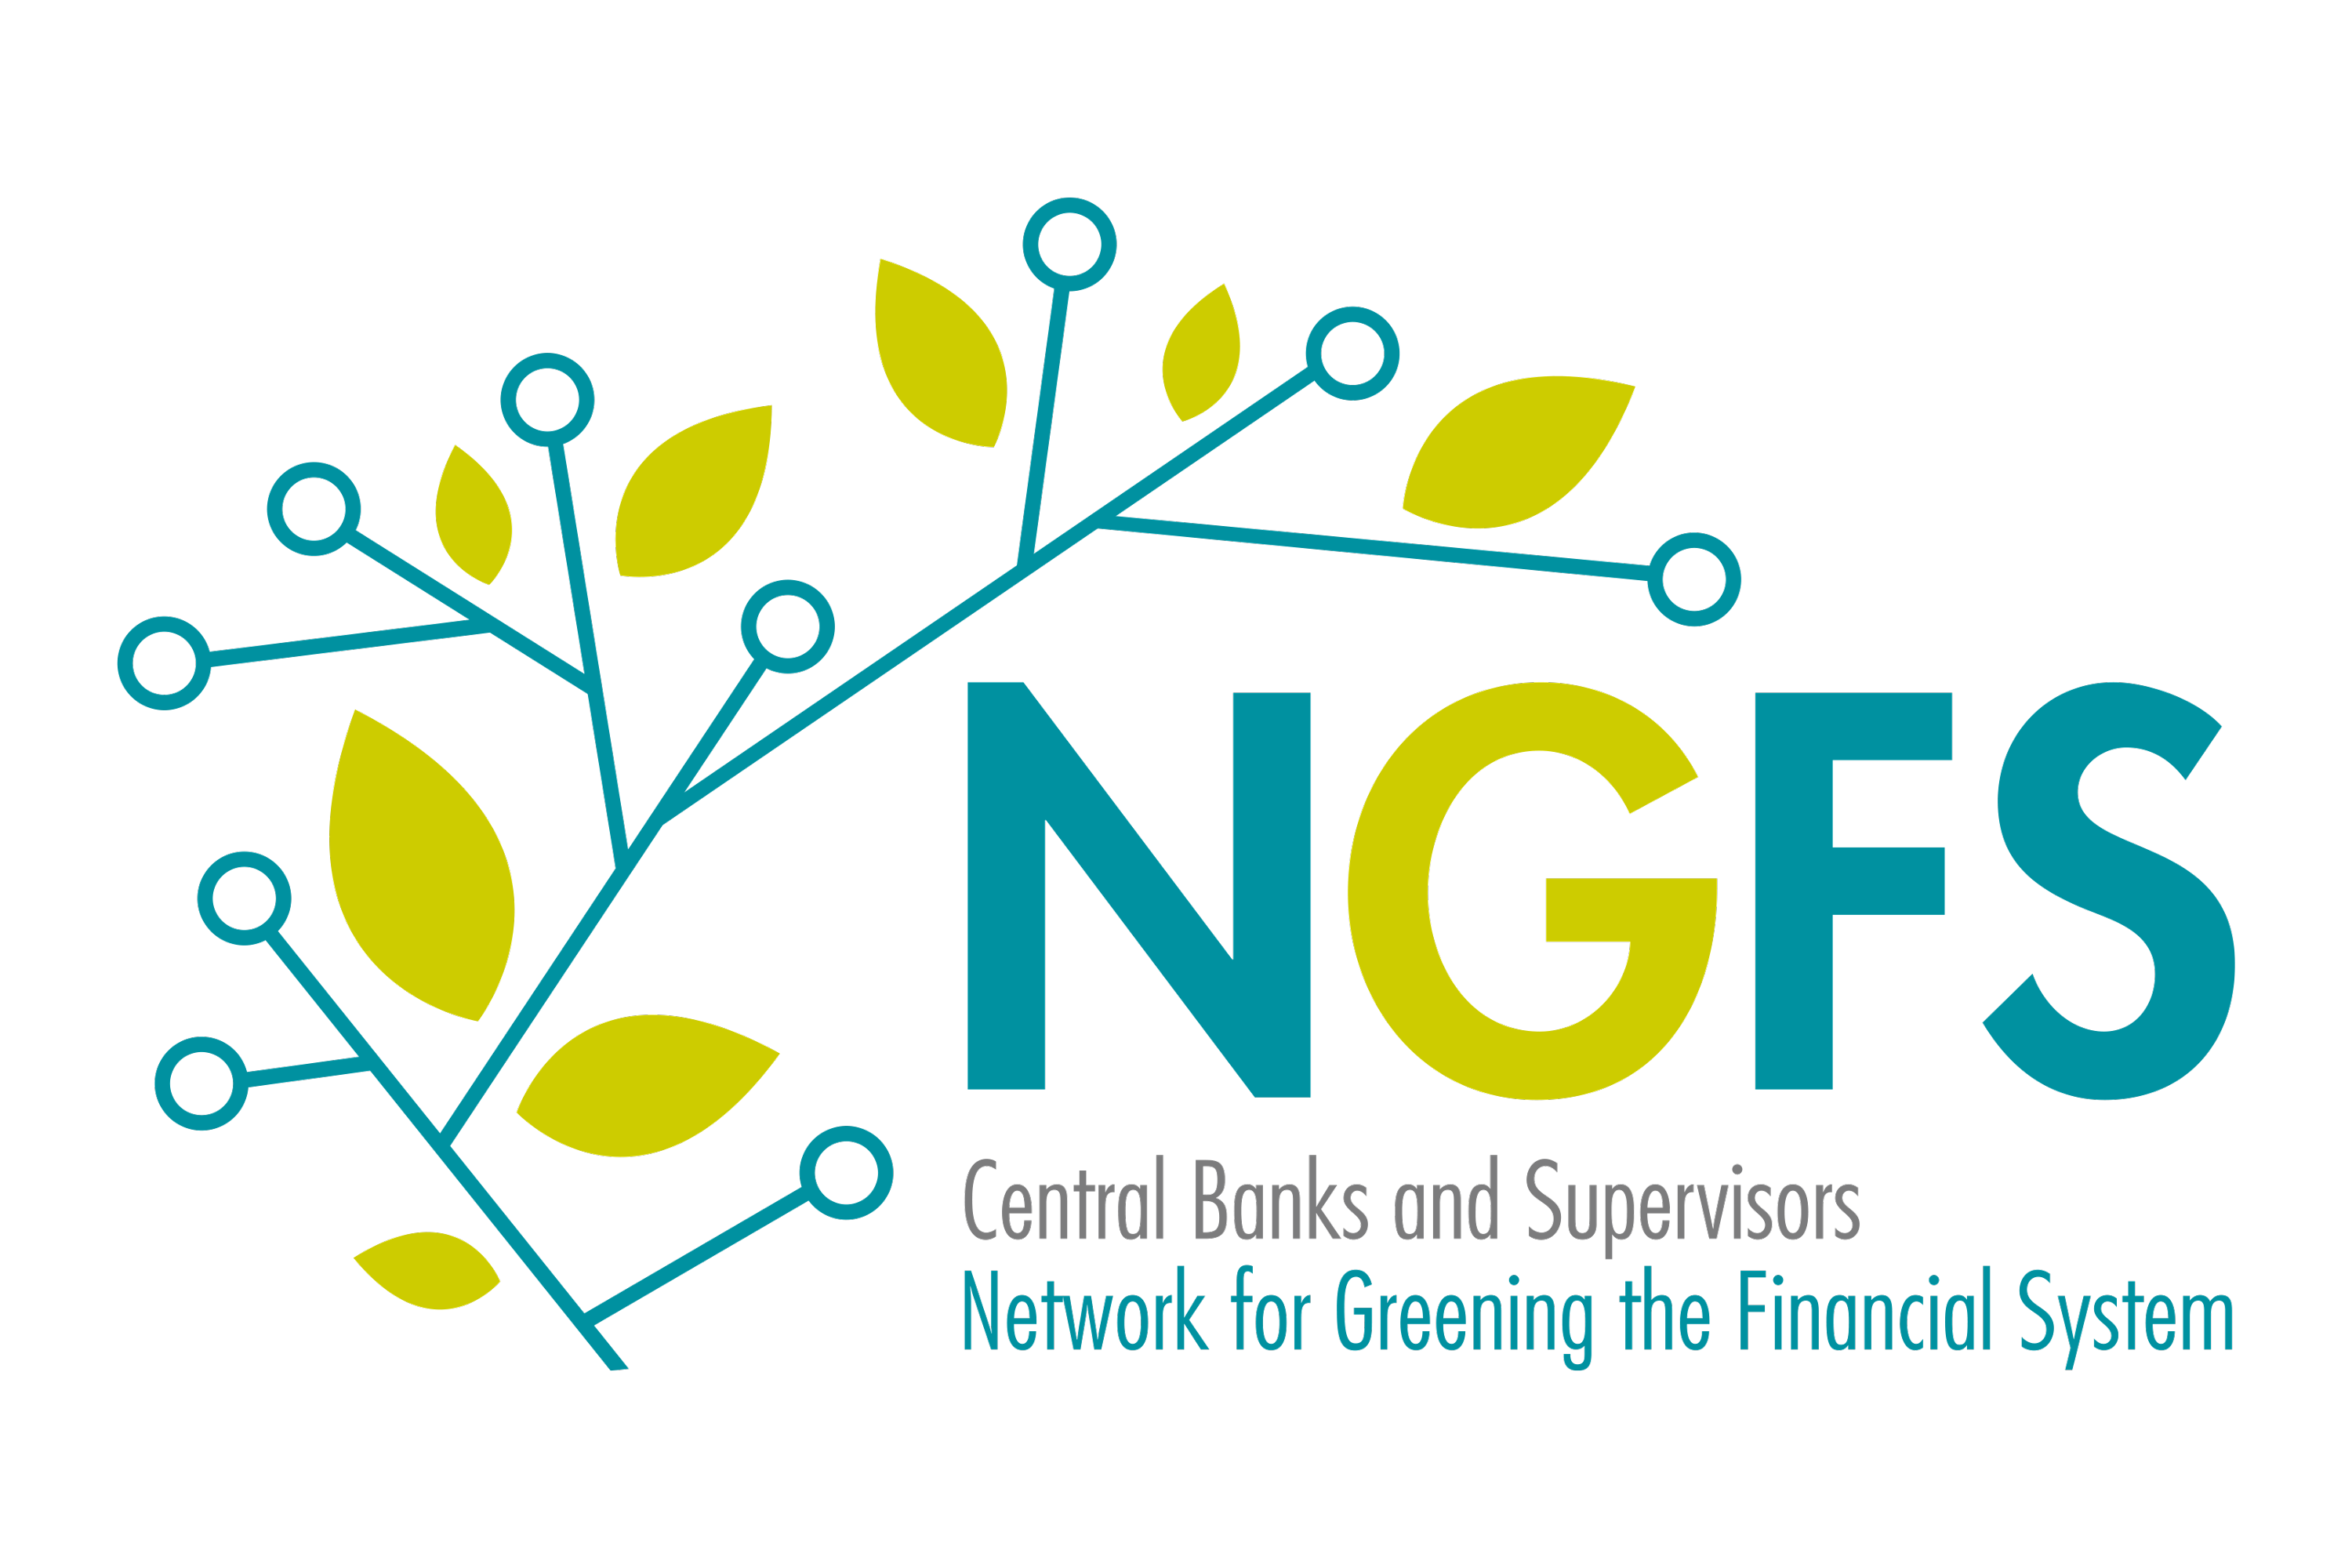 NGFS - Network for Greening the Financial System